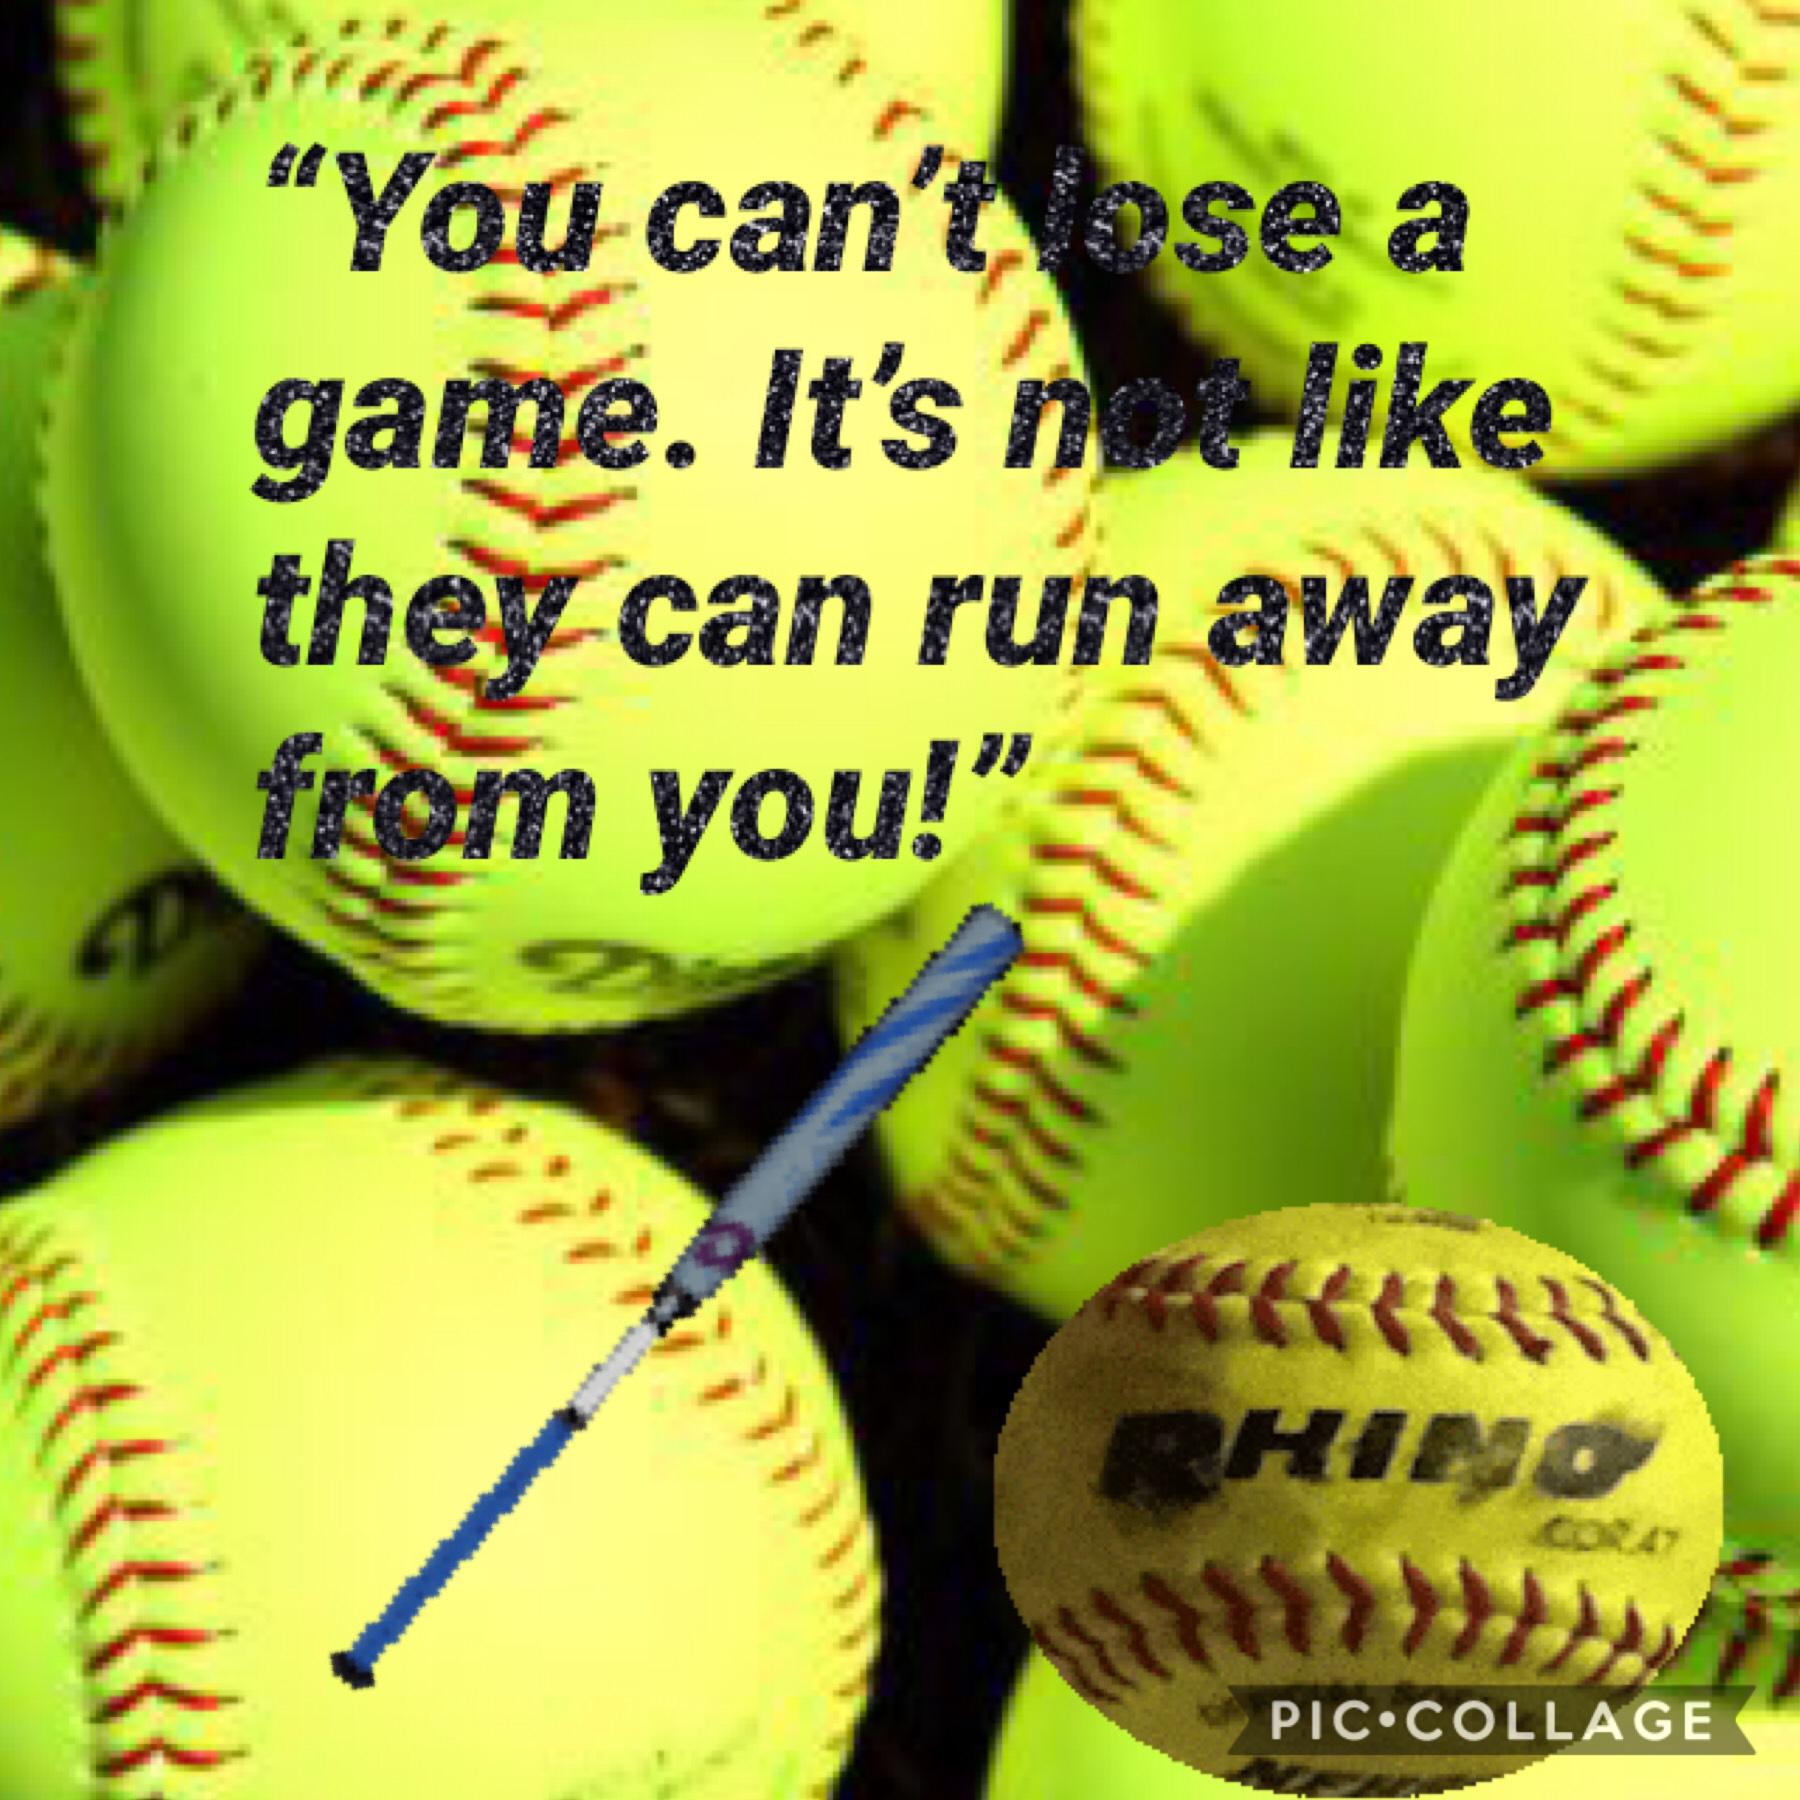 Think about softball like this, especially if you lost many games to competeters